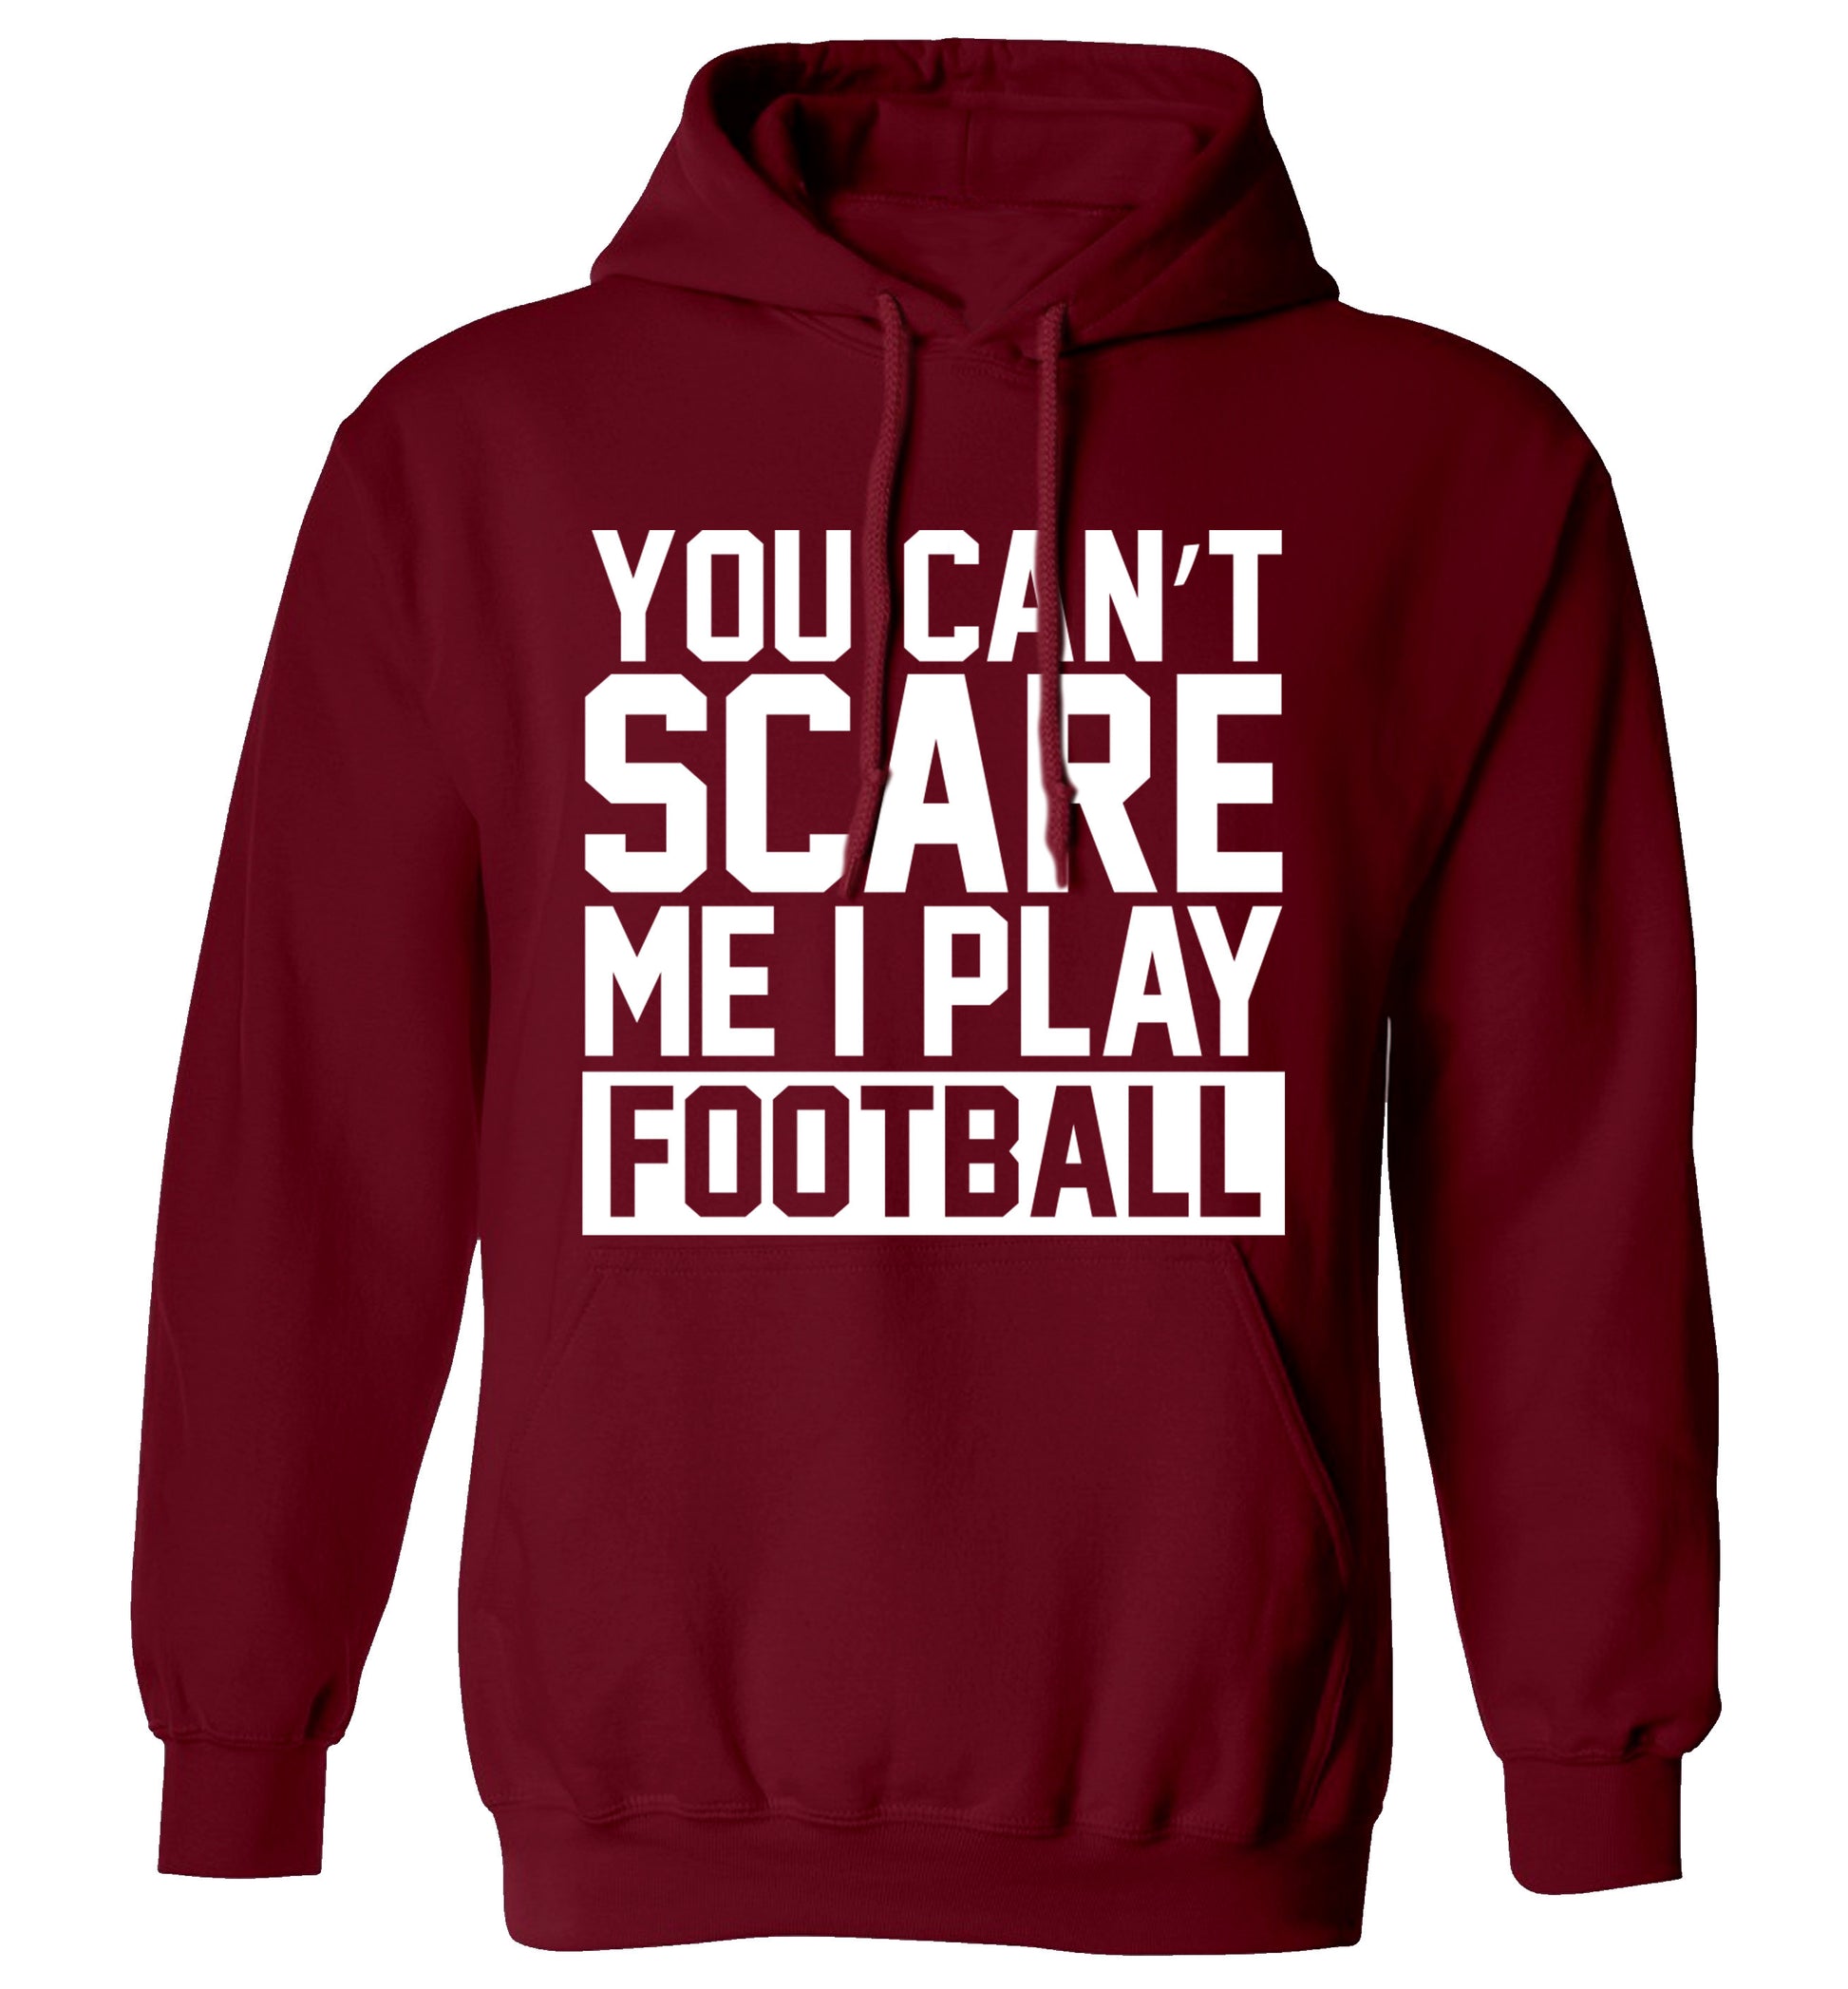 You can't scare me I play football adults unisex maroon hoodie 2XL